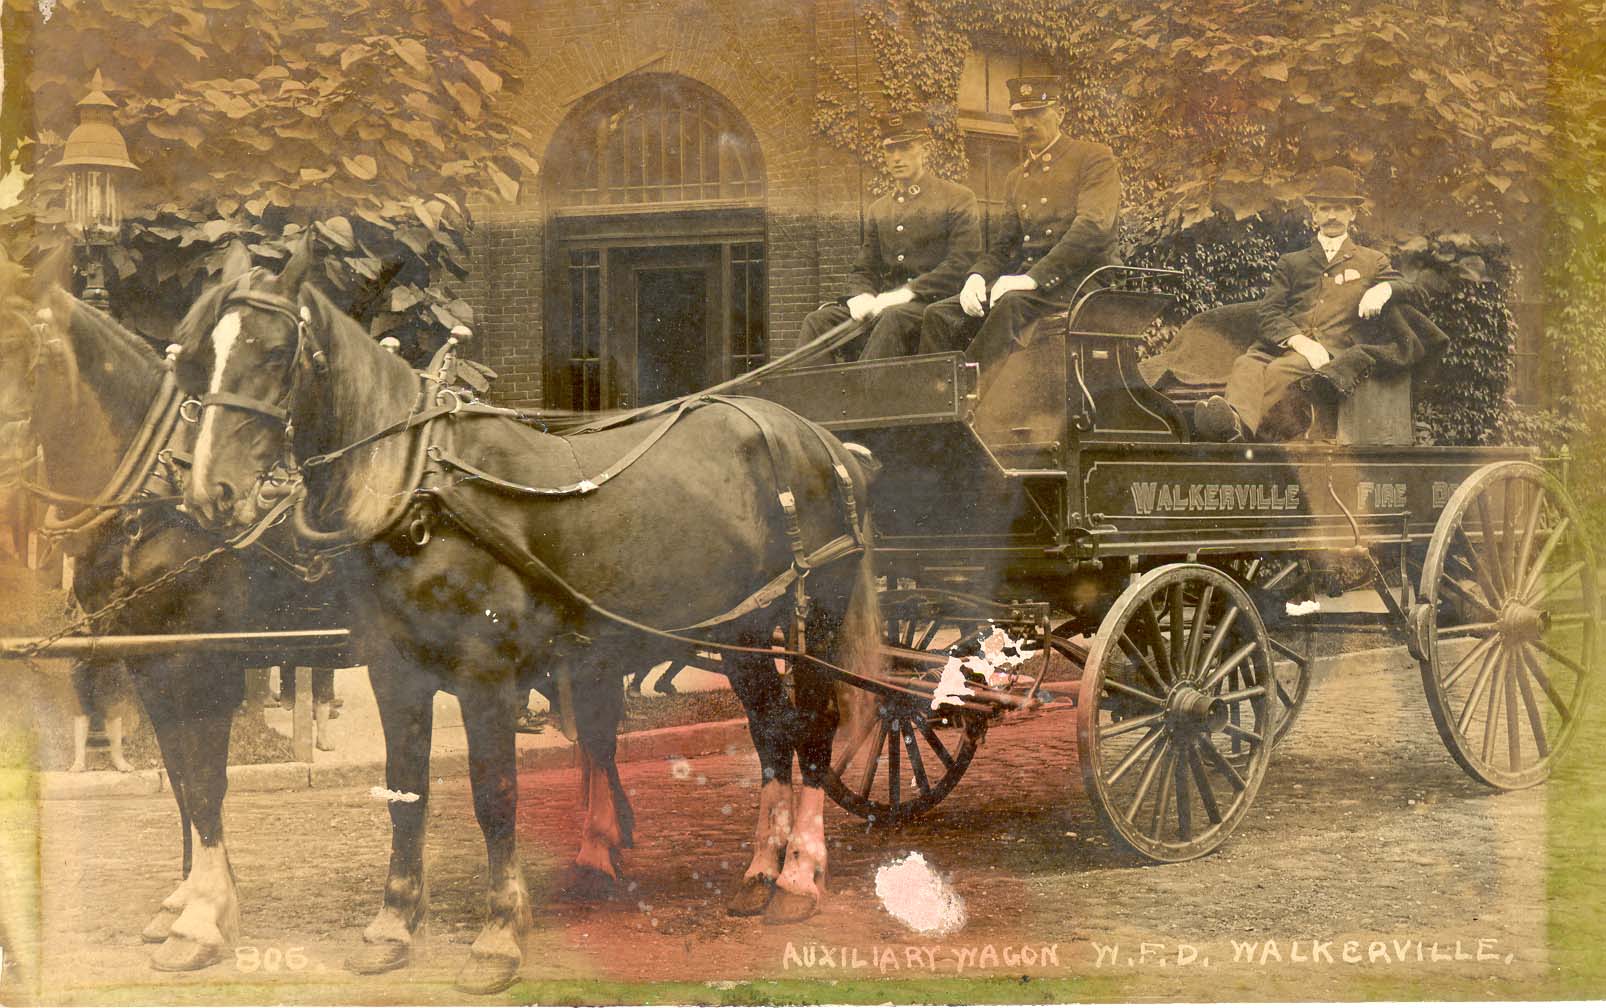 the%20horse-driven%20auxillary%20fire%20wagon%20of%20the%20Walkerville%20Fire%20Dept